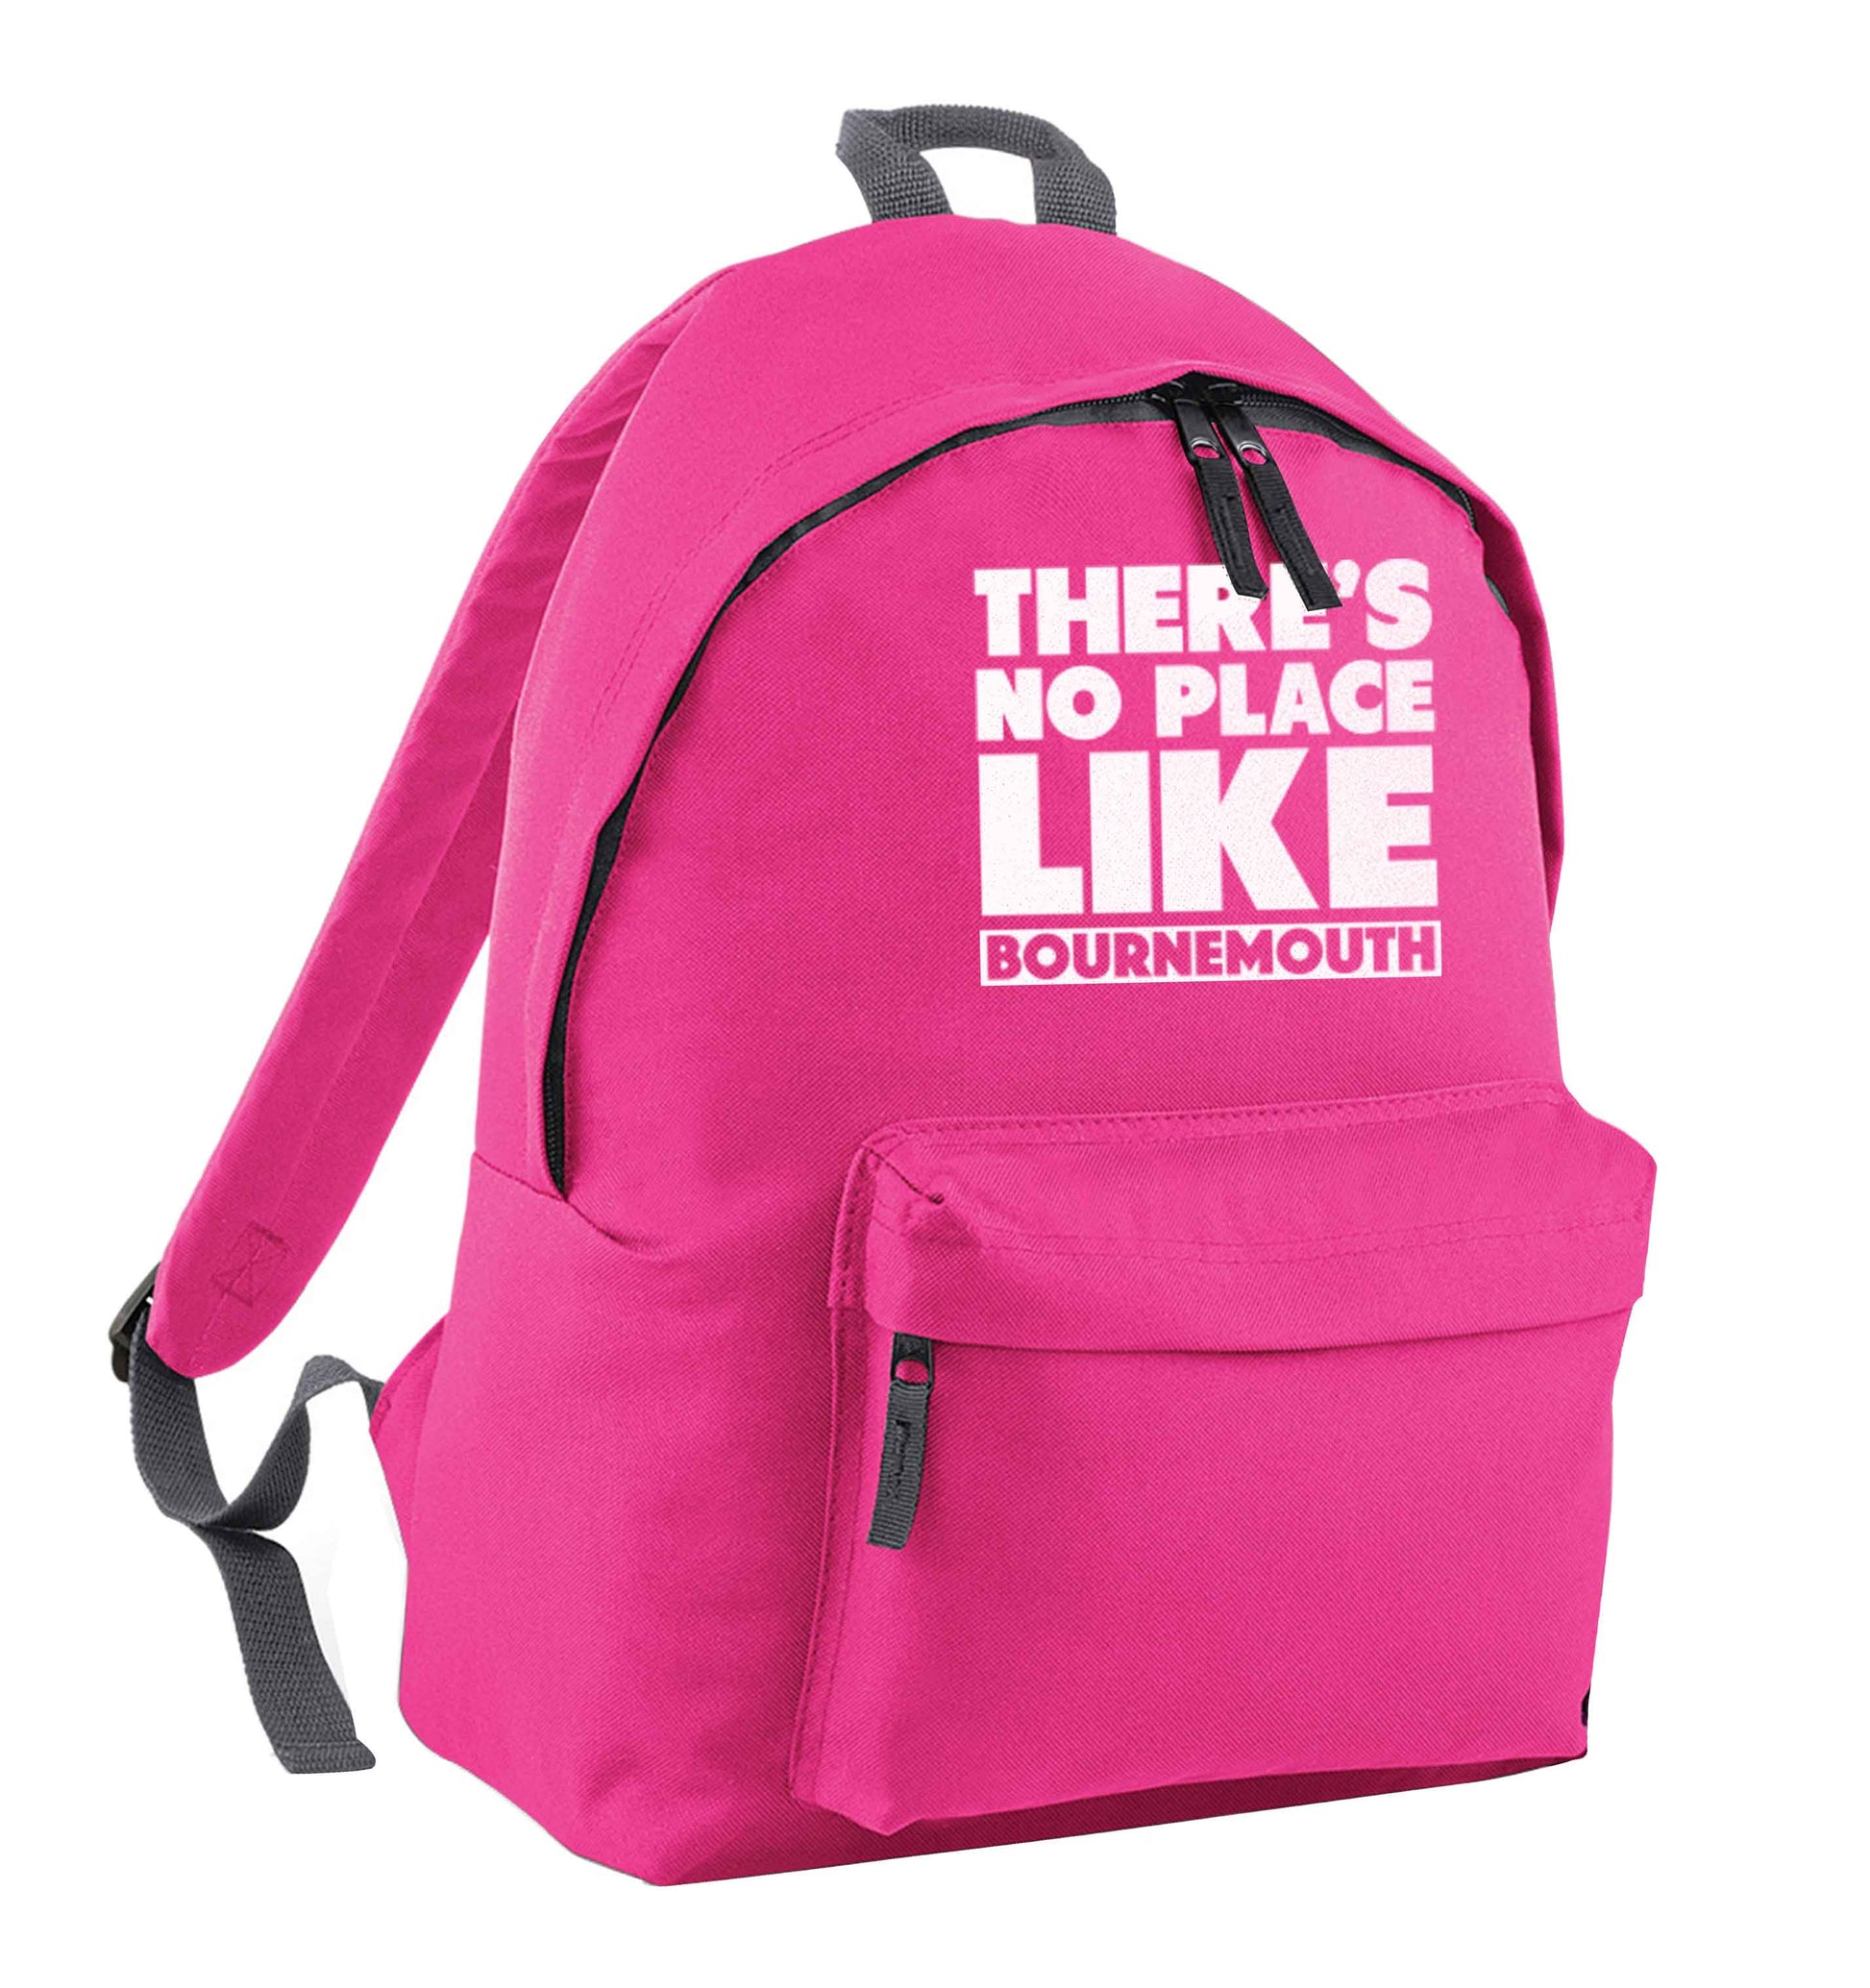 There's no place like Bournemouth pink adults backpack